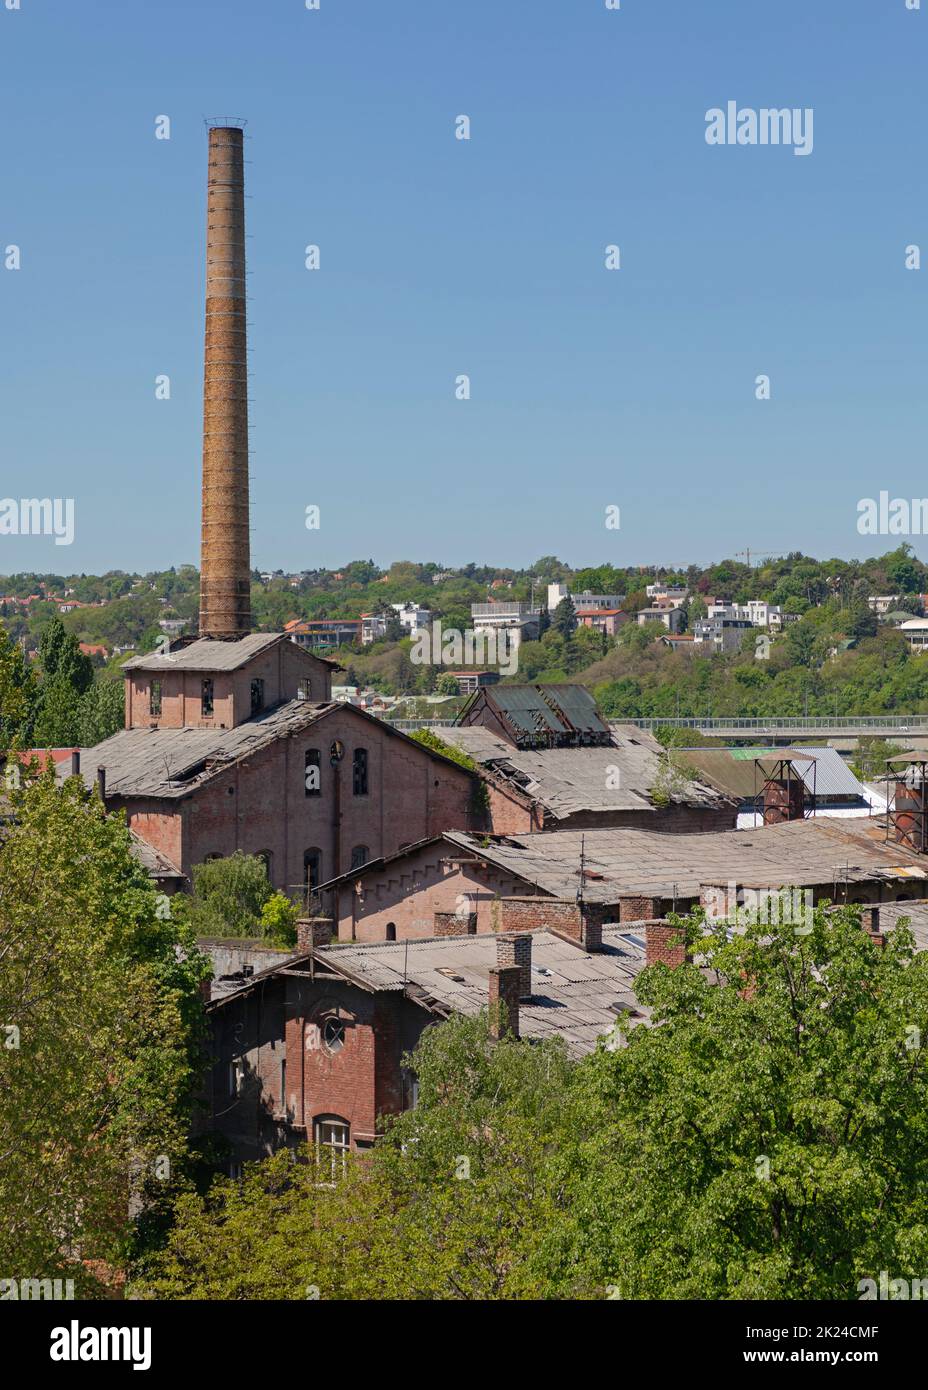 Big Brick Chimney at Abandoned Factory Building Complex Stock Photo